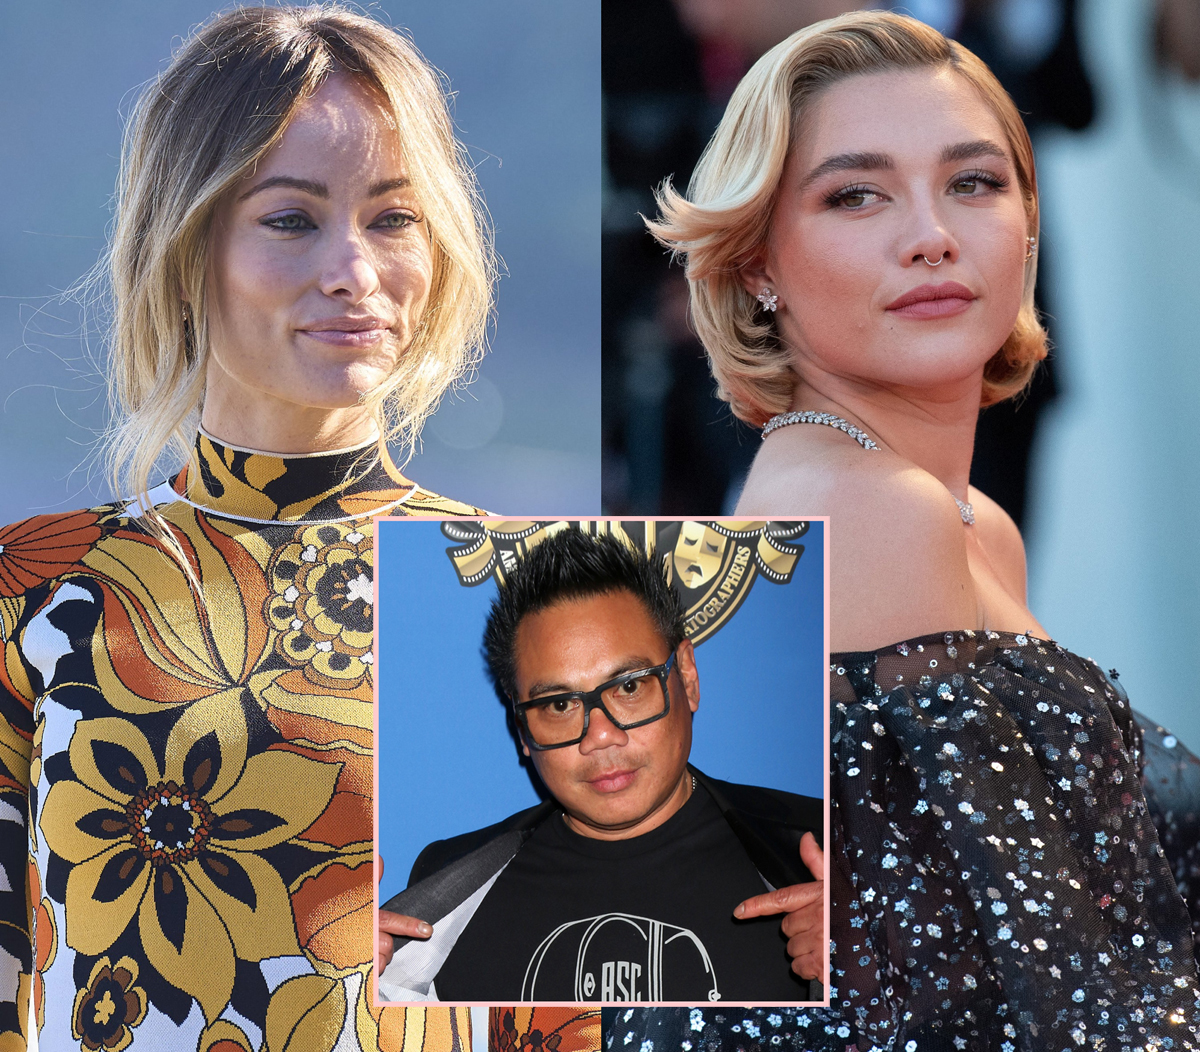 #Don’t Worry Darling Cinematographer Speaks Out About Florence Pugh & Olivia Wilde’s Feud: ‘Whatever Happened, It Happened Way After I Left’